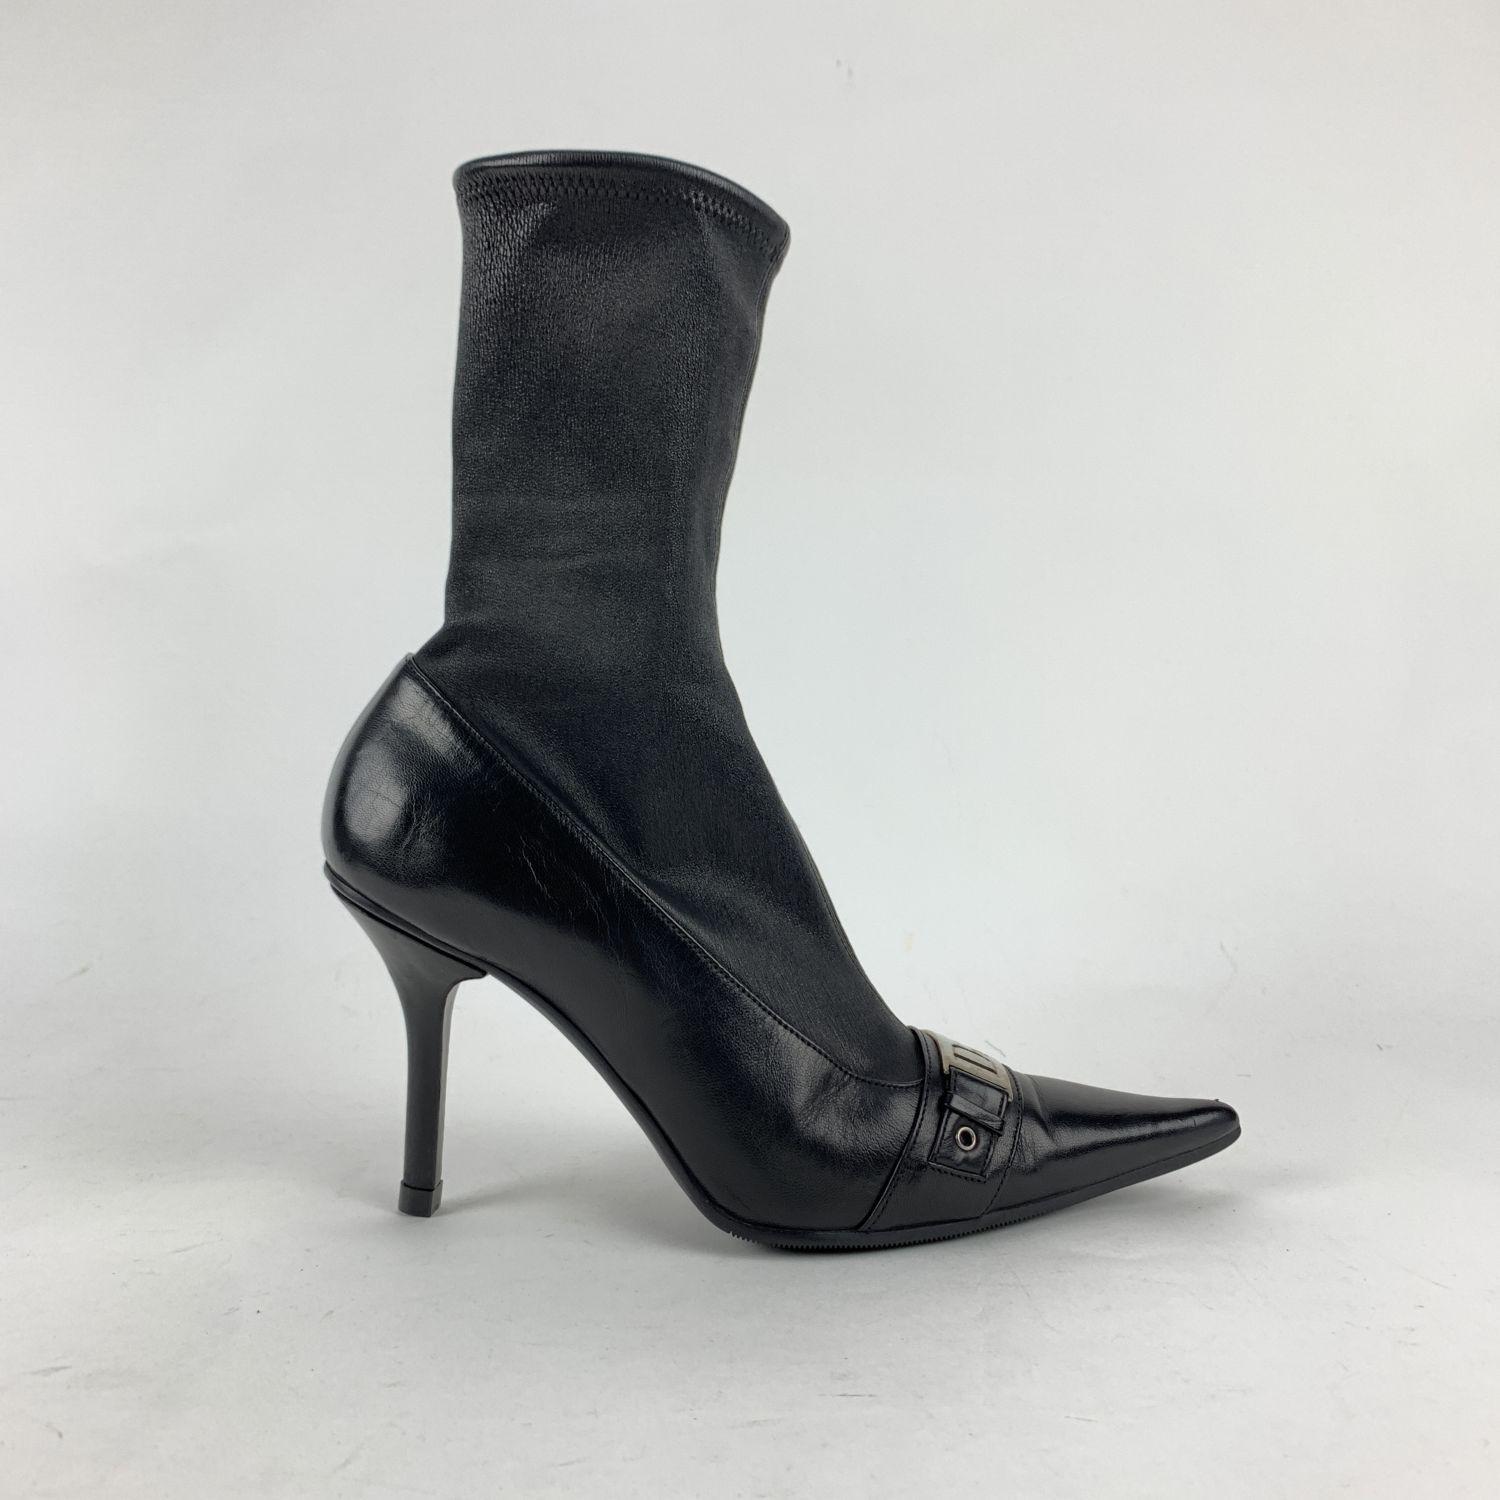 Christian Dior sock boots crafted from stretchy black leather that gently hugs your foot and ankle. Stiletto heels. Pointed toe. Silver metal cut-out logo buckle on the toes. Heels height: 4 inches - 10,2 cm.  Made in Italy.  Size is not indicated.